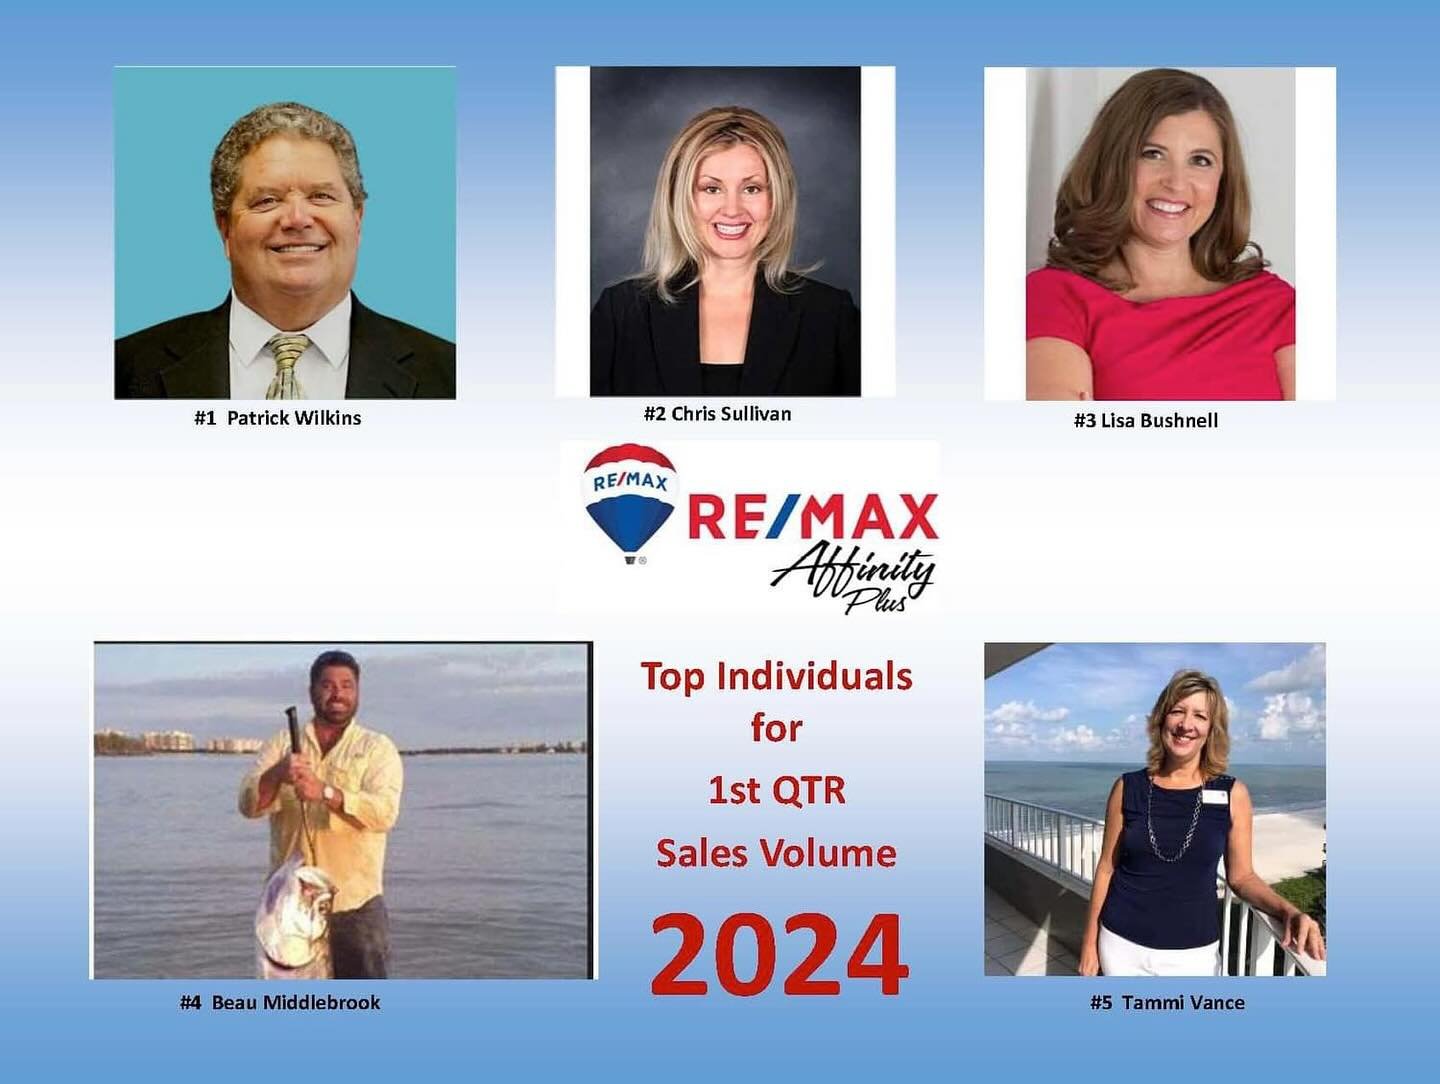 Congratulations to my colleagues for their hard work! RE/MAX rocks!